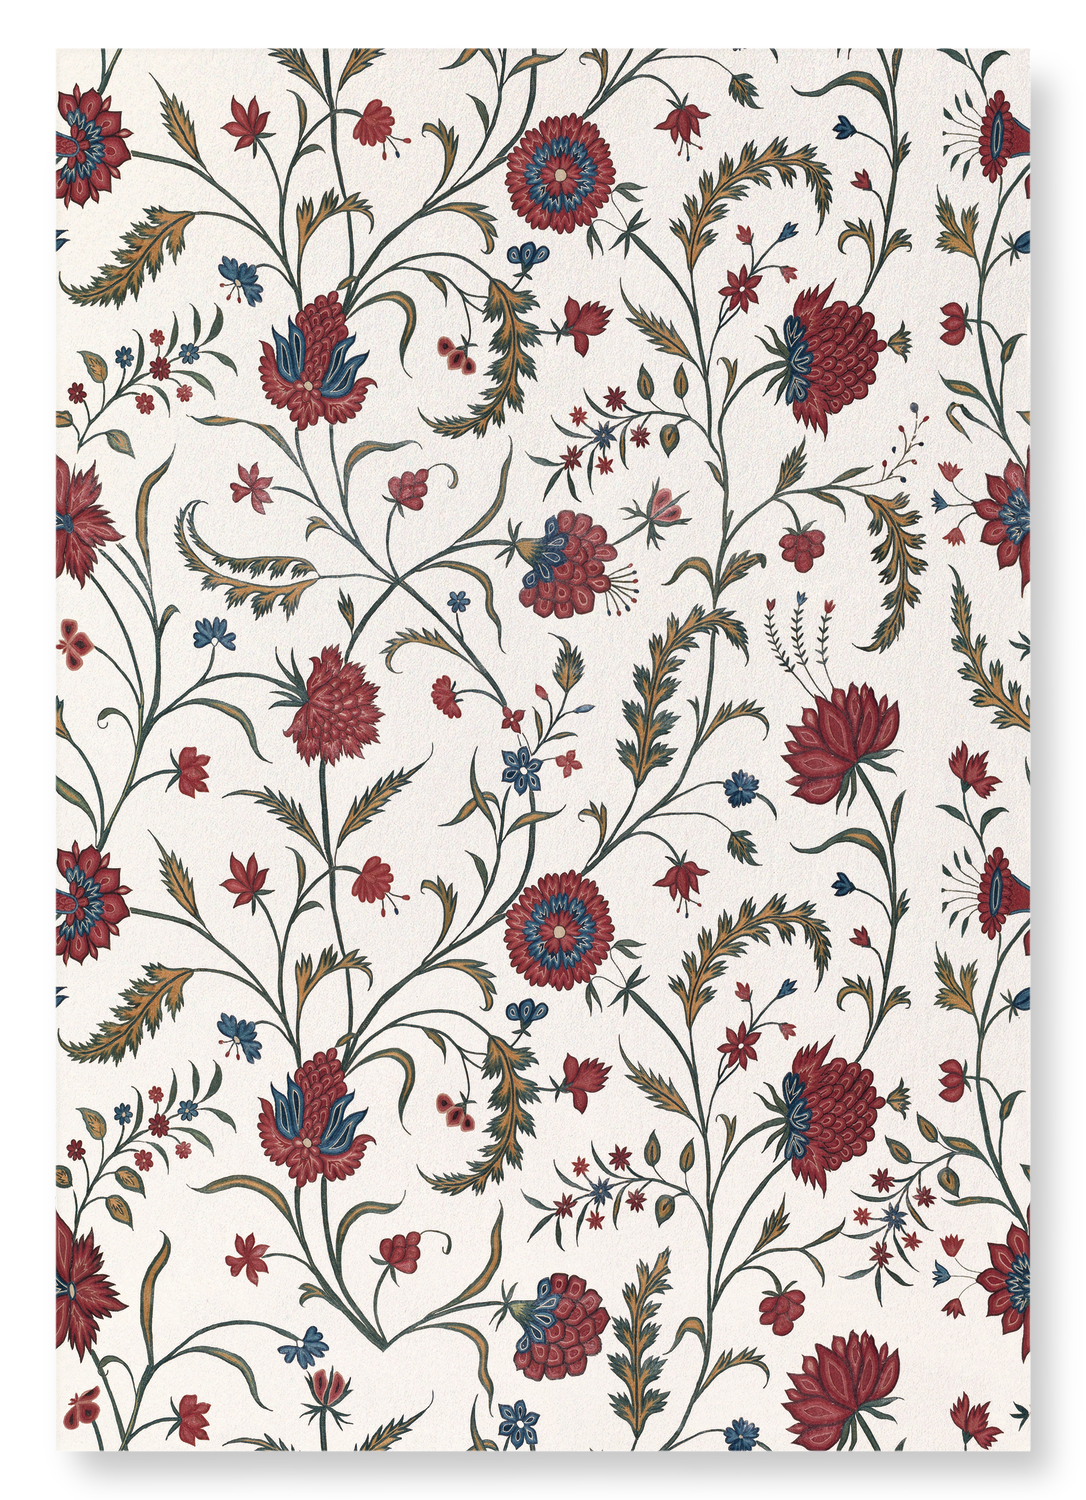 RED FLORAL EMBROIDERY (18TH C.)